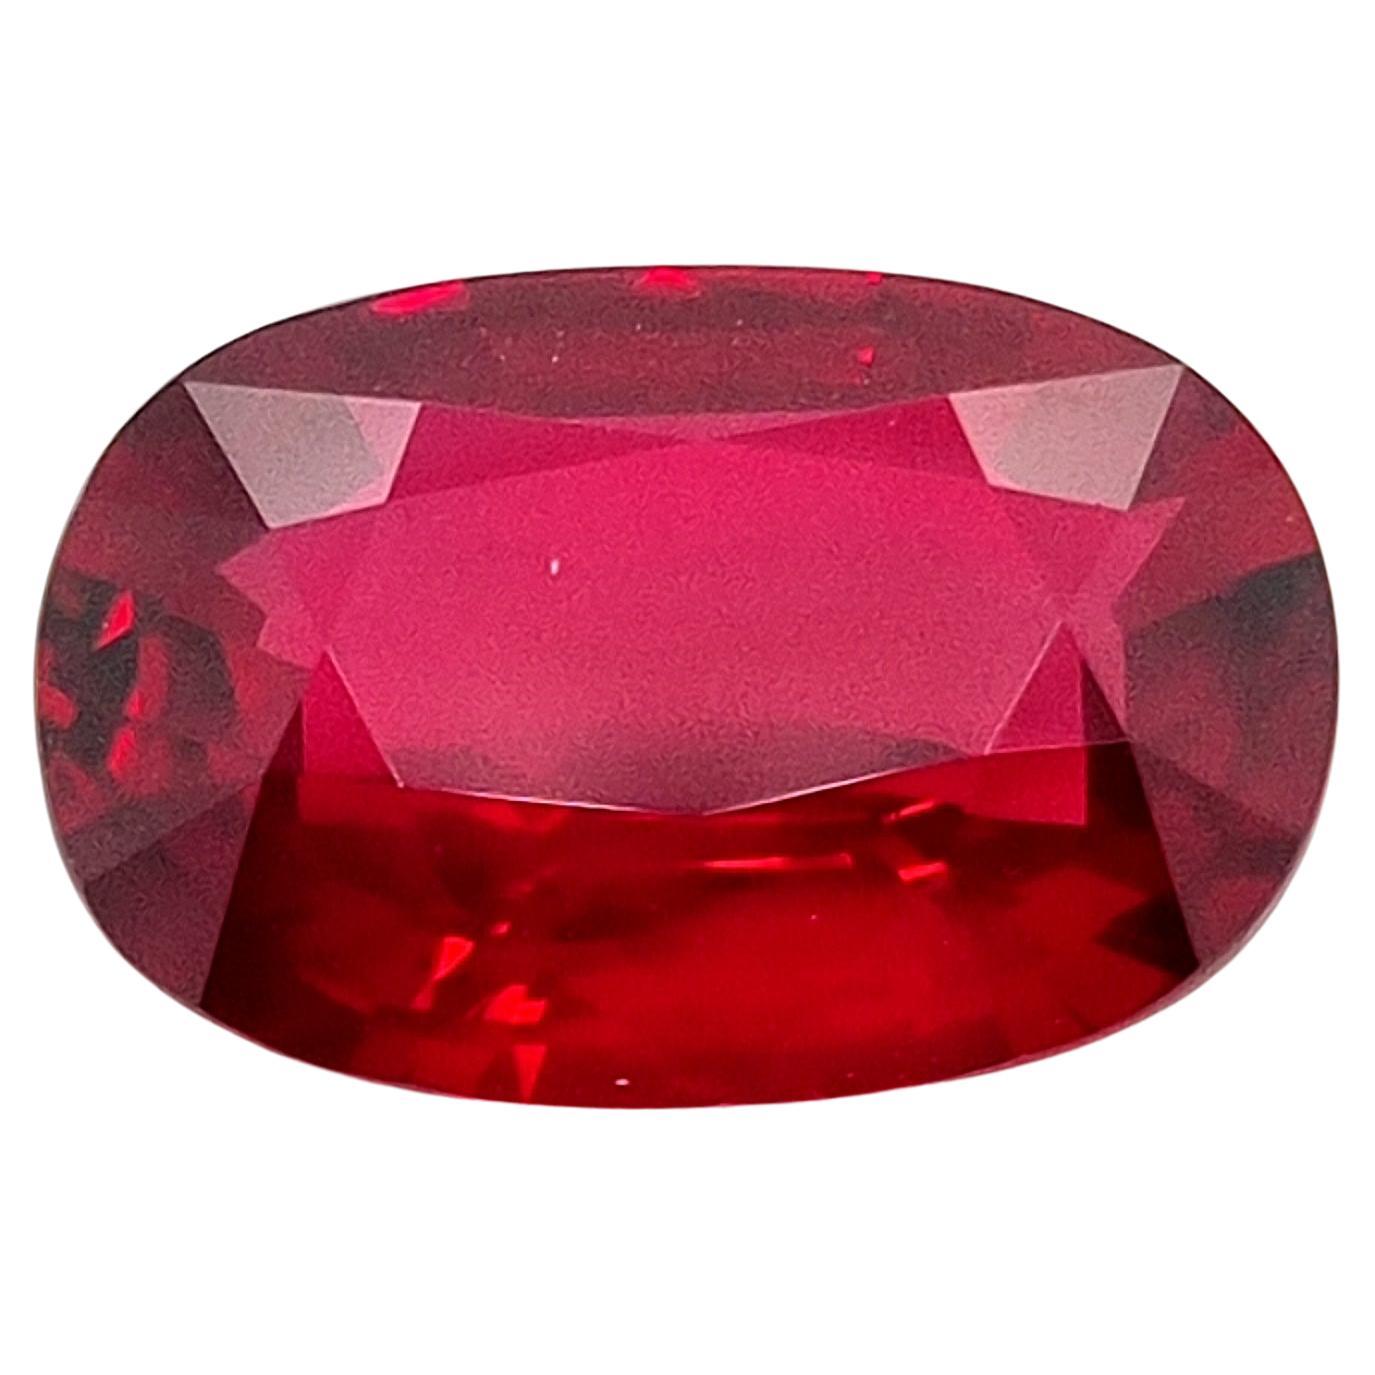 5ct Unheated Mozambican 'Pigeons Blood' Ruby